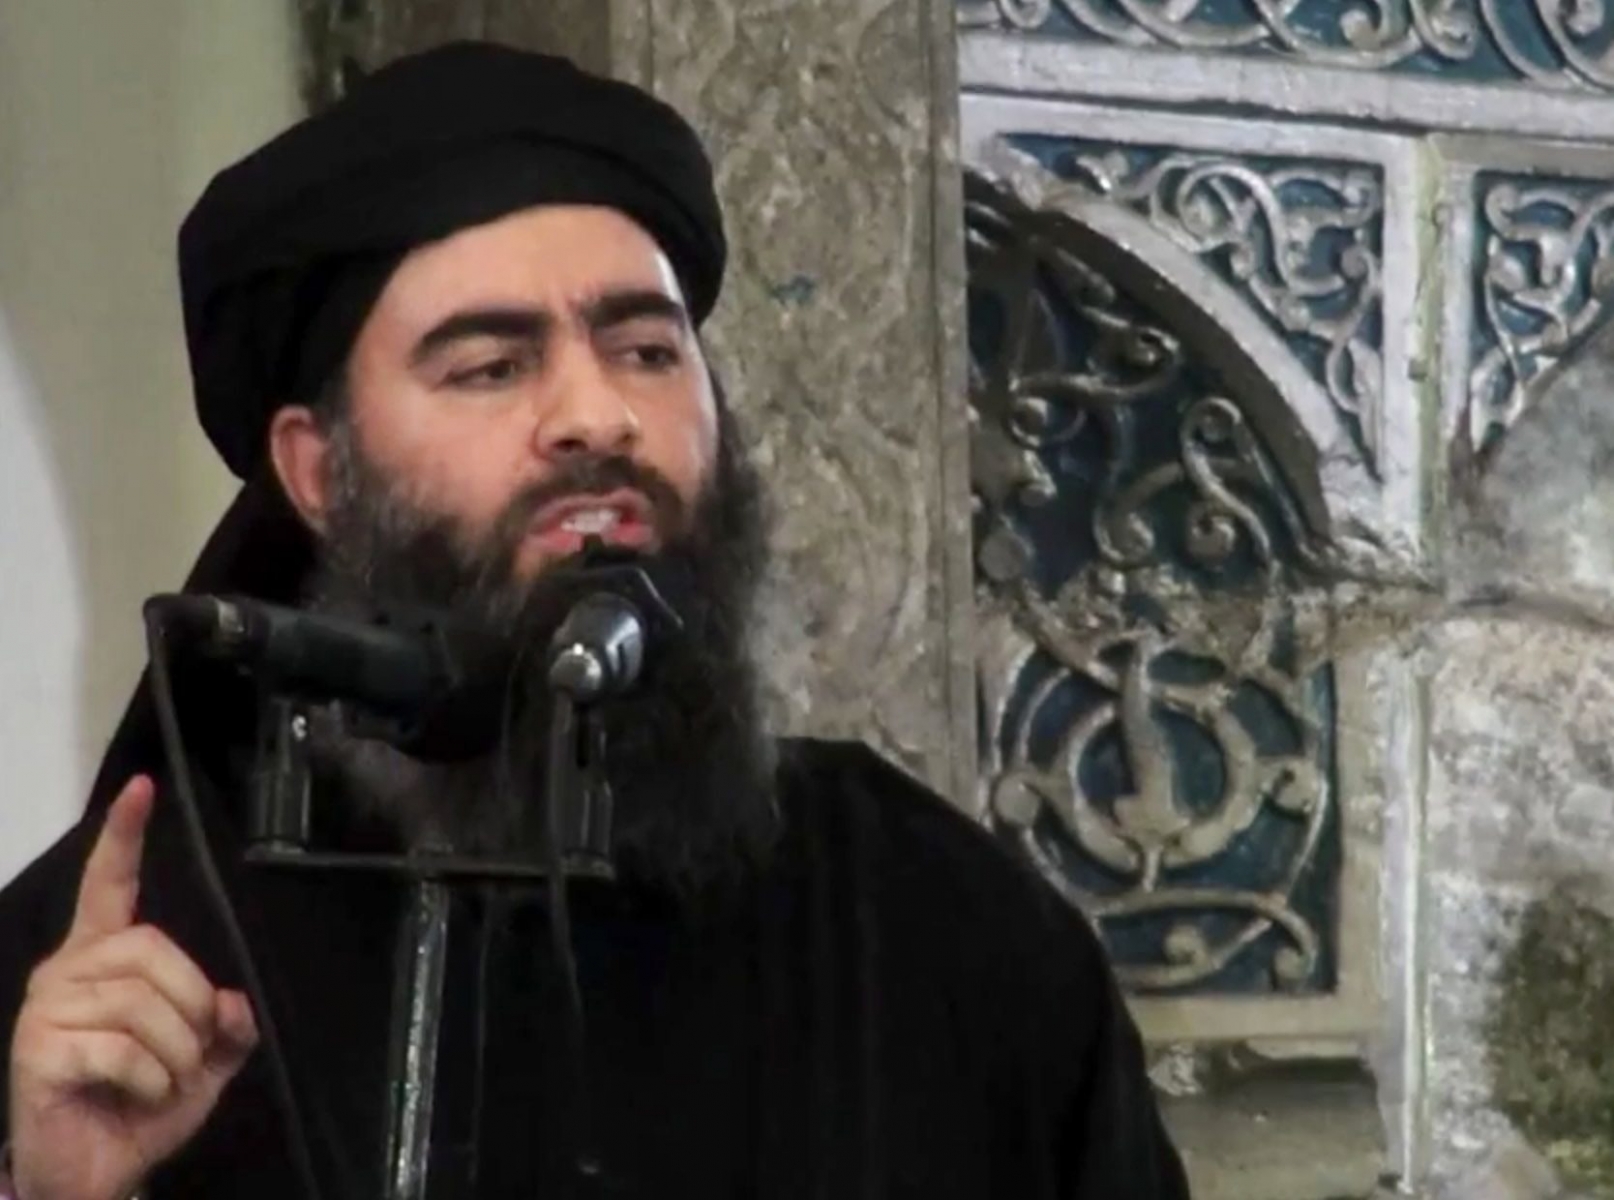 FILE - This file image made from video posted on a militant website Saturday, July 5, 2014, purports to show the leader of the Islamic State group, Abu Bakr al-Baghdadi, delivering a sermon at a mosque in Iraq during his first public appearance. The Islamic State group has released a new message purportedly from its reclusive leader, claiming his self-styled ìcaliphateî is doing ìwellî despite an unprecedented alliance against it. (AP Photo/Militant video, File) MIDEAST ISLAMIC STATE